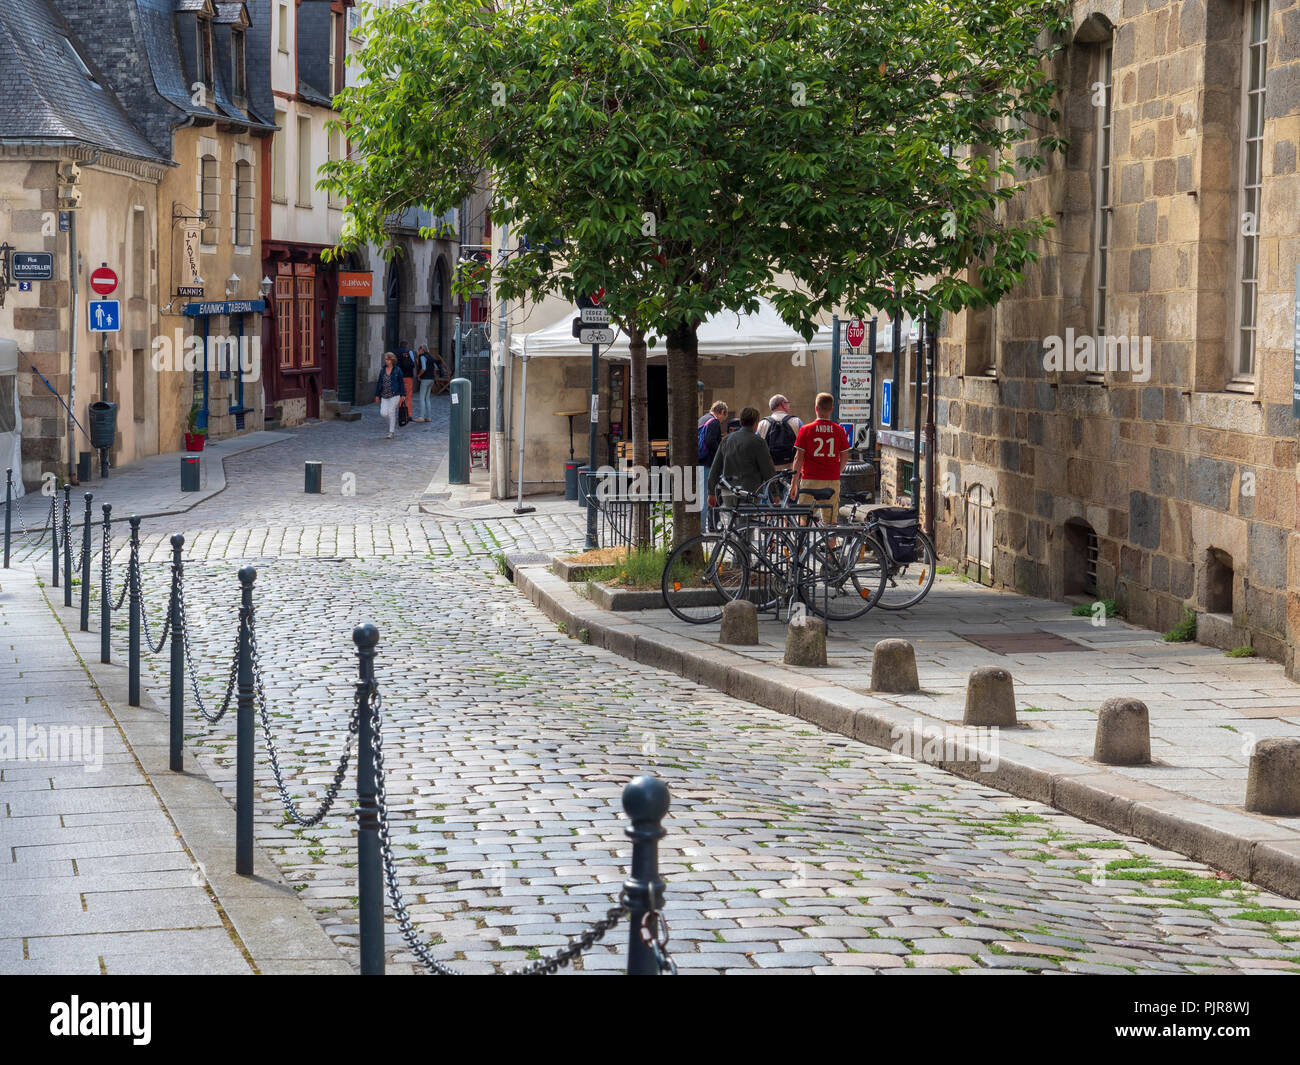 Half-timbered houses and cobbled streets, old Rennes, France. Stock Photo